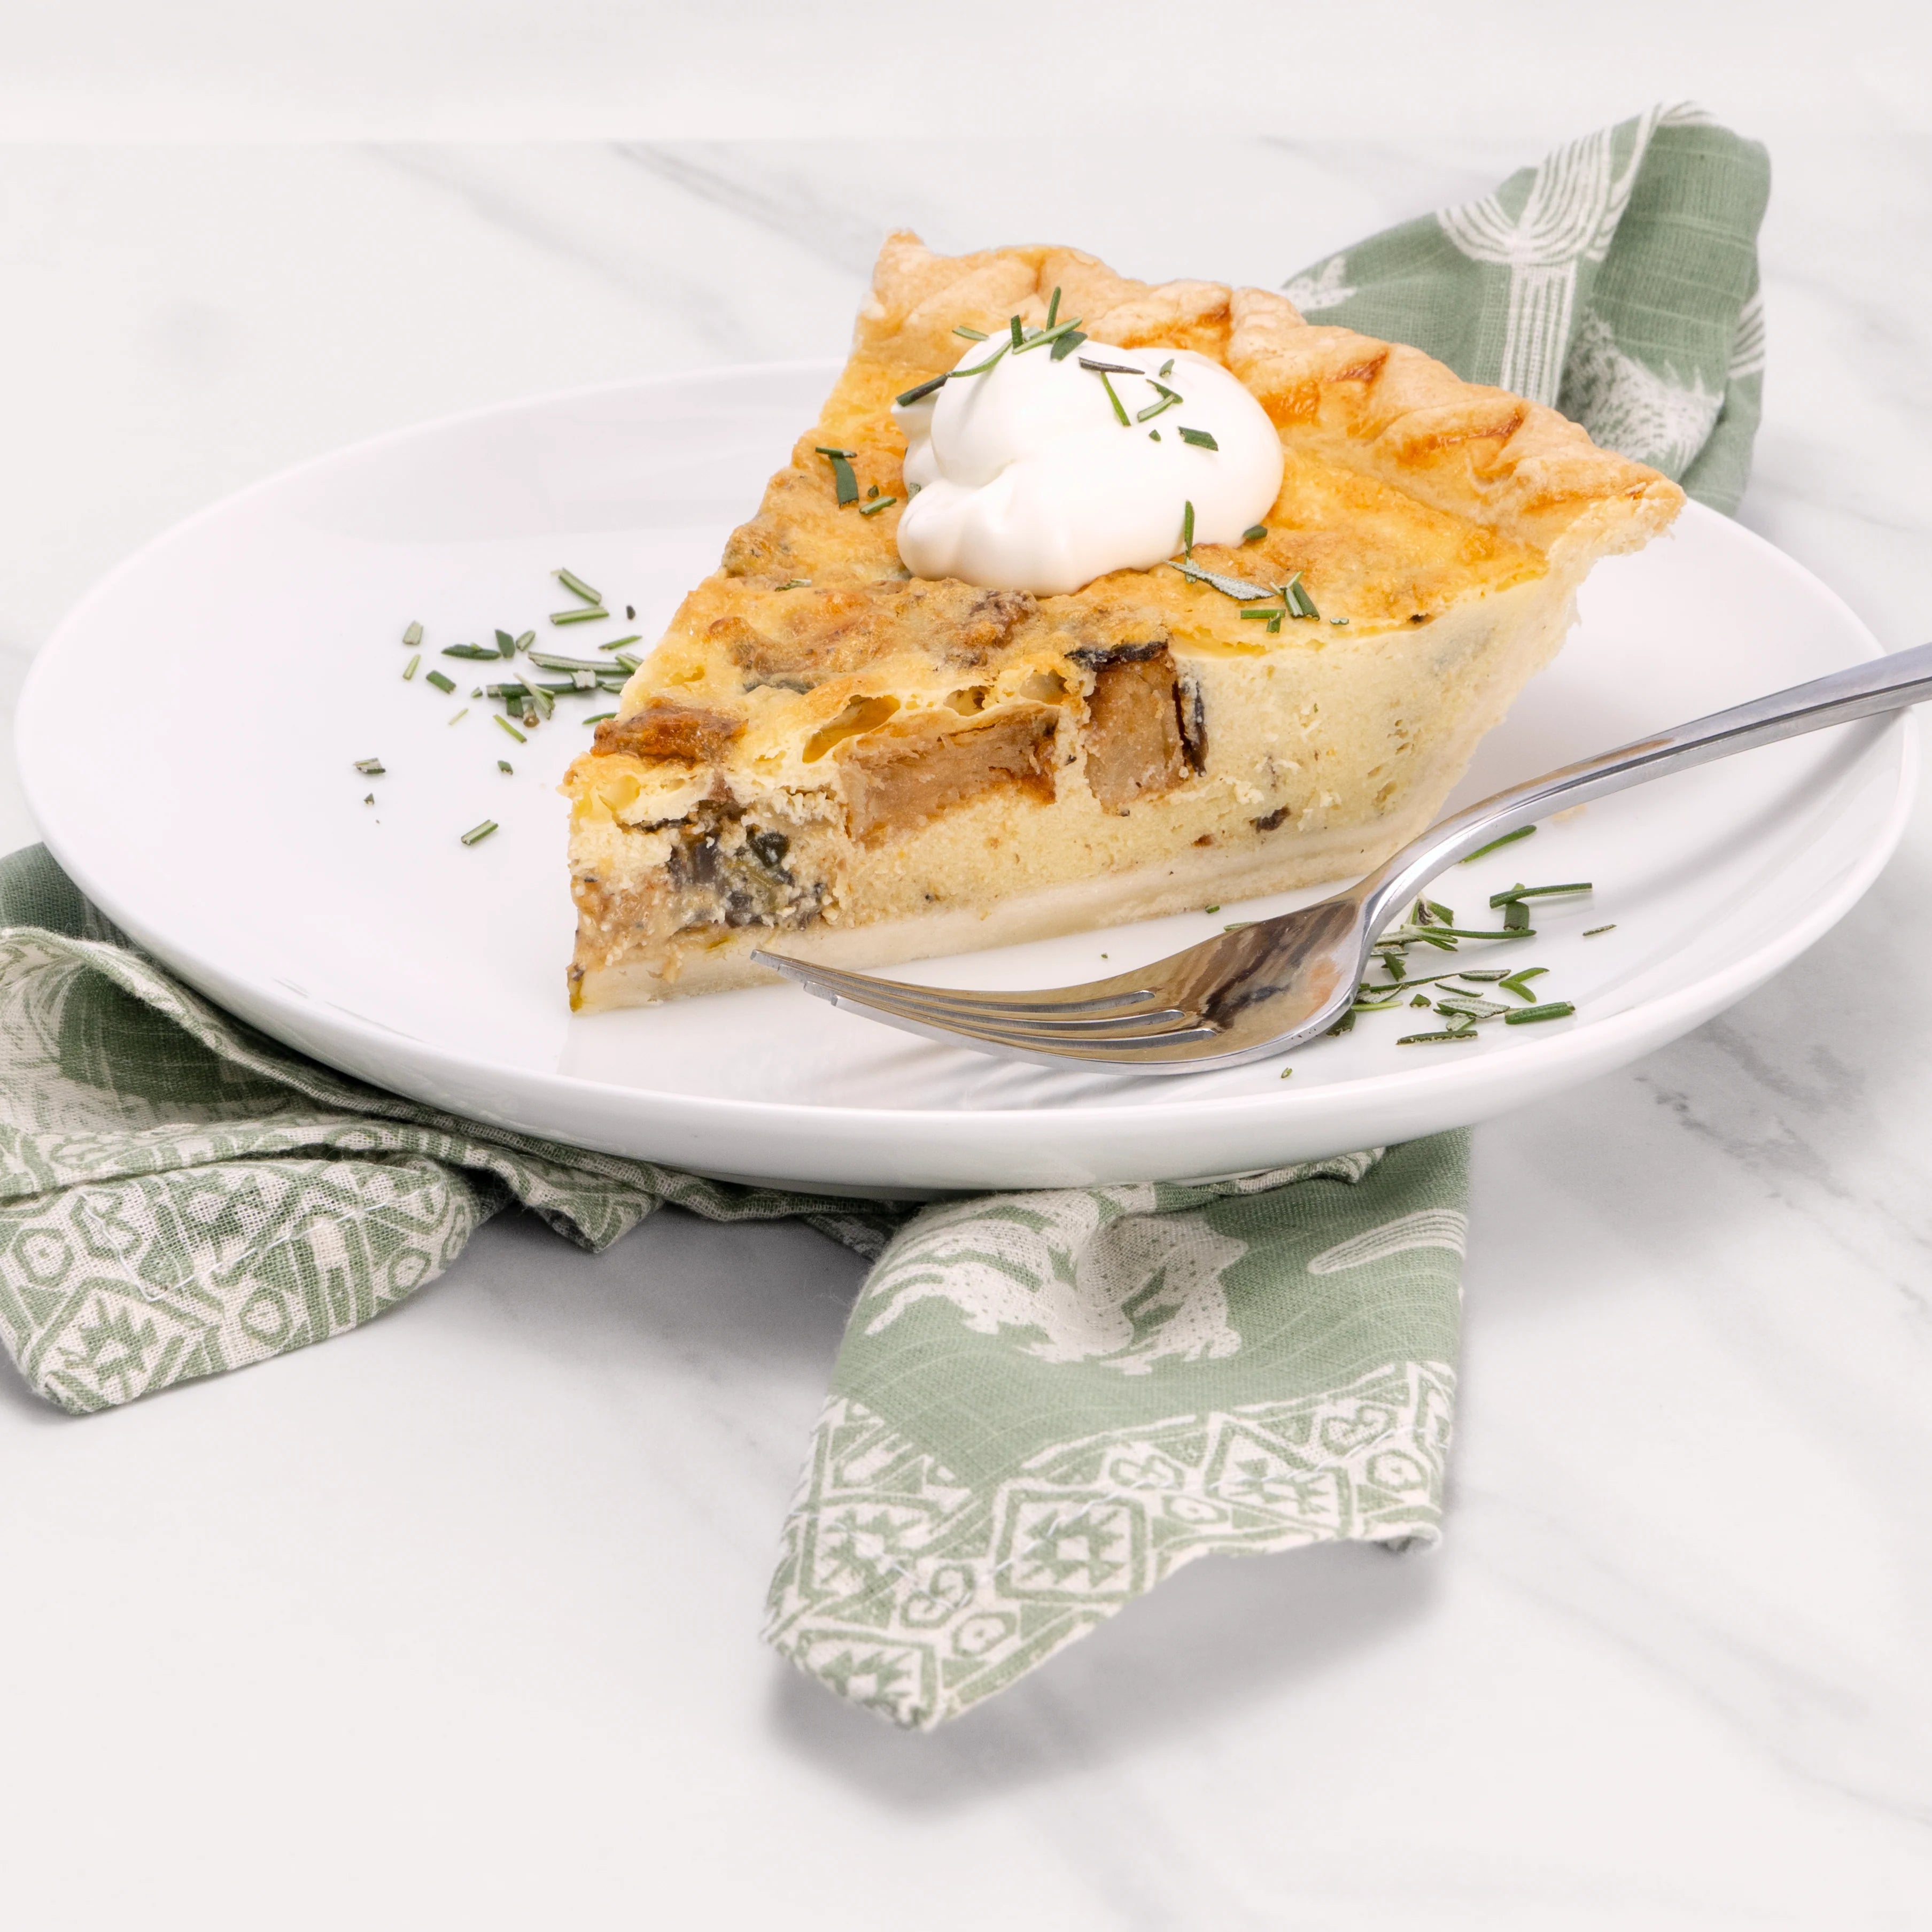 Slice of Hatch Mushroom quiche garnished with rosemary and sour cream.